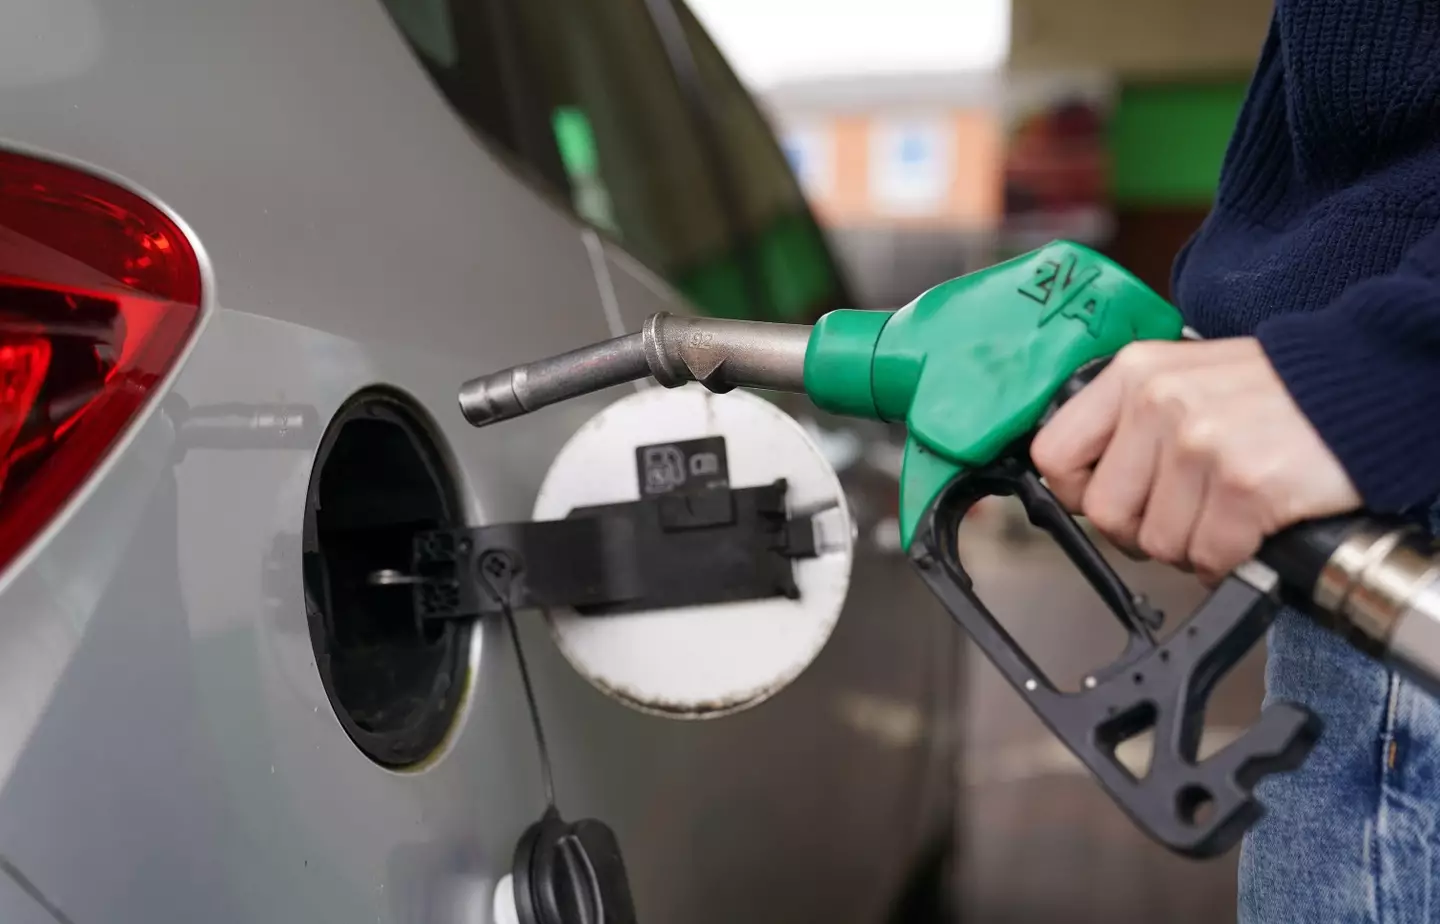 A petrol station in Greater Manchester has received widespread praise for lowering its prices amid the cost of living crisis.